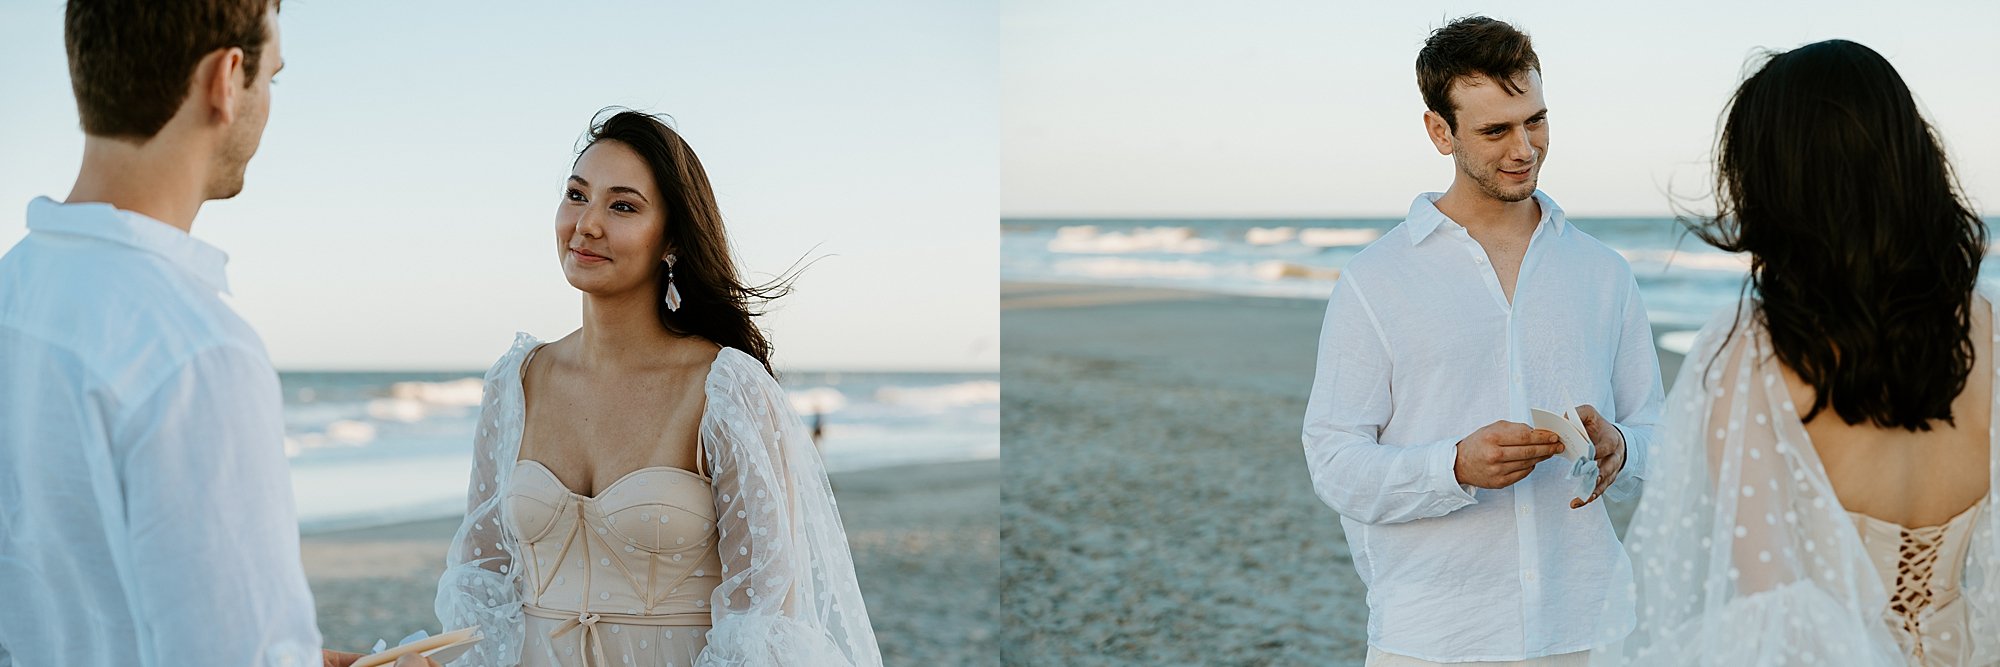 How to elope in Charleston SC - couple shares their vows together on the beach at sunset.